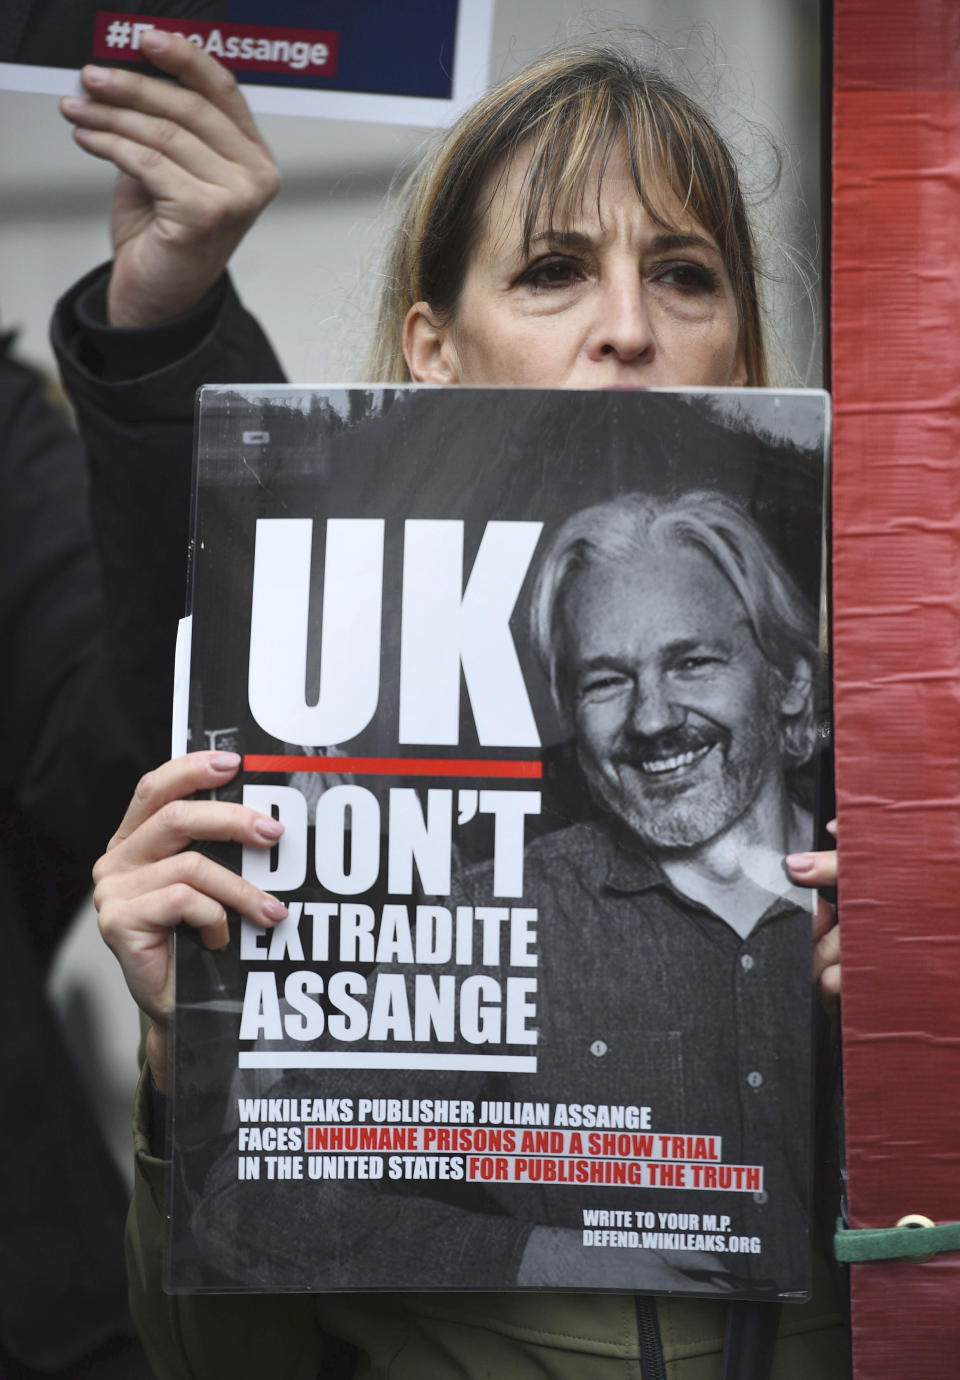 A supporter of Wikileaks founder Julian Assange demonstrates oustide Westminster Magistrates' Court in London where Assange is expected to appear as he fights extradition to the United States on charges of conspiring to hack into a Pentagon computer, in London, Monday, Oct, 21, 2019. U.S. authorities accuse Assange of scheming with former Army intelligence analyst Chelsea Manning to break a password for a classified government computer. (Kirsty O'Connor/PA via AP)